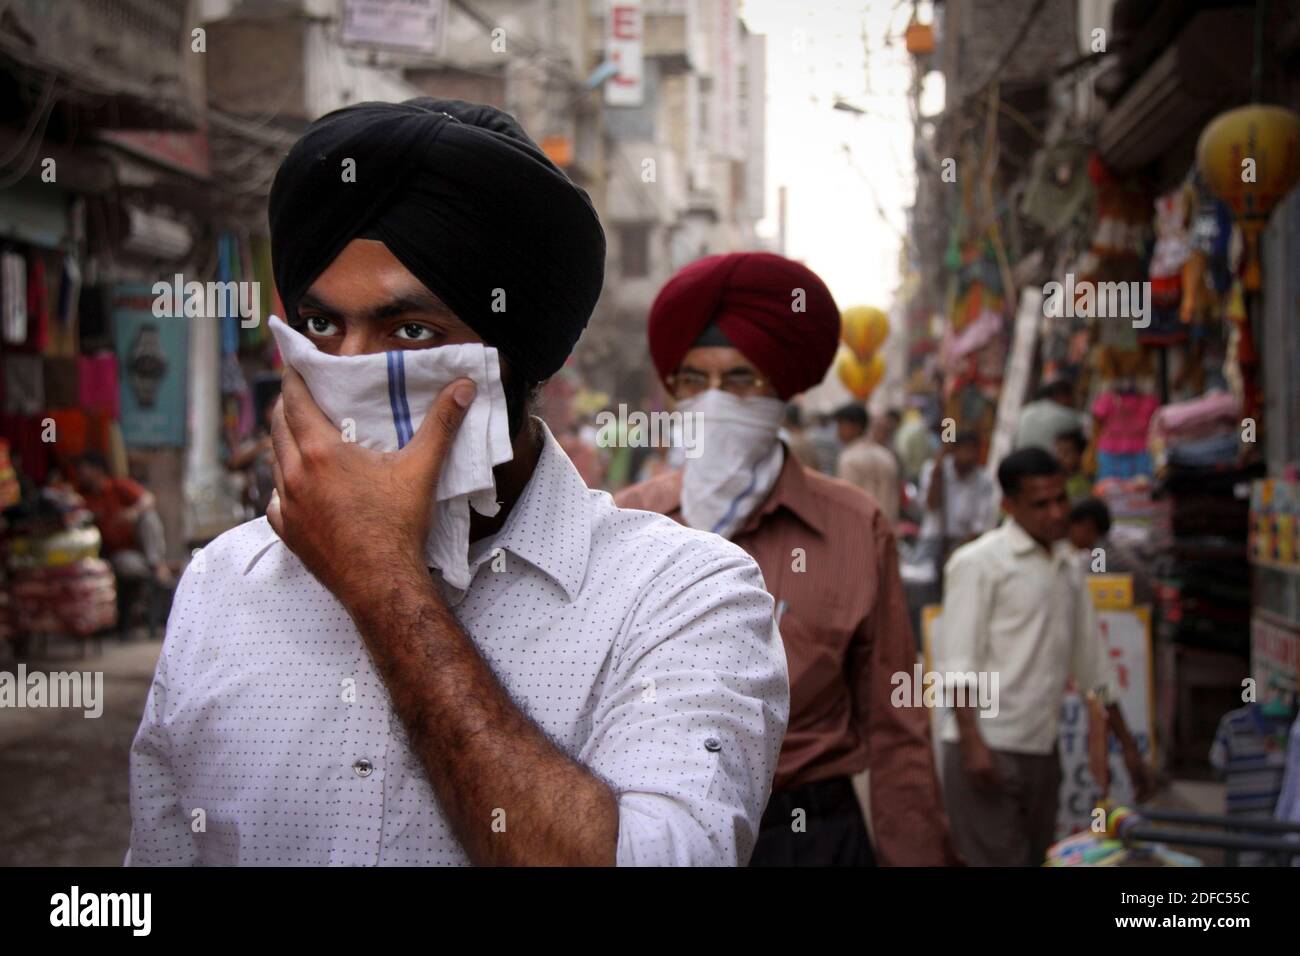 India, Sikh men walk down a street in New Delhi wearing a turban and covering their faces Stock Photo